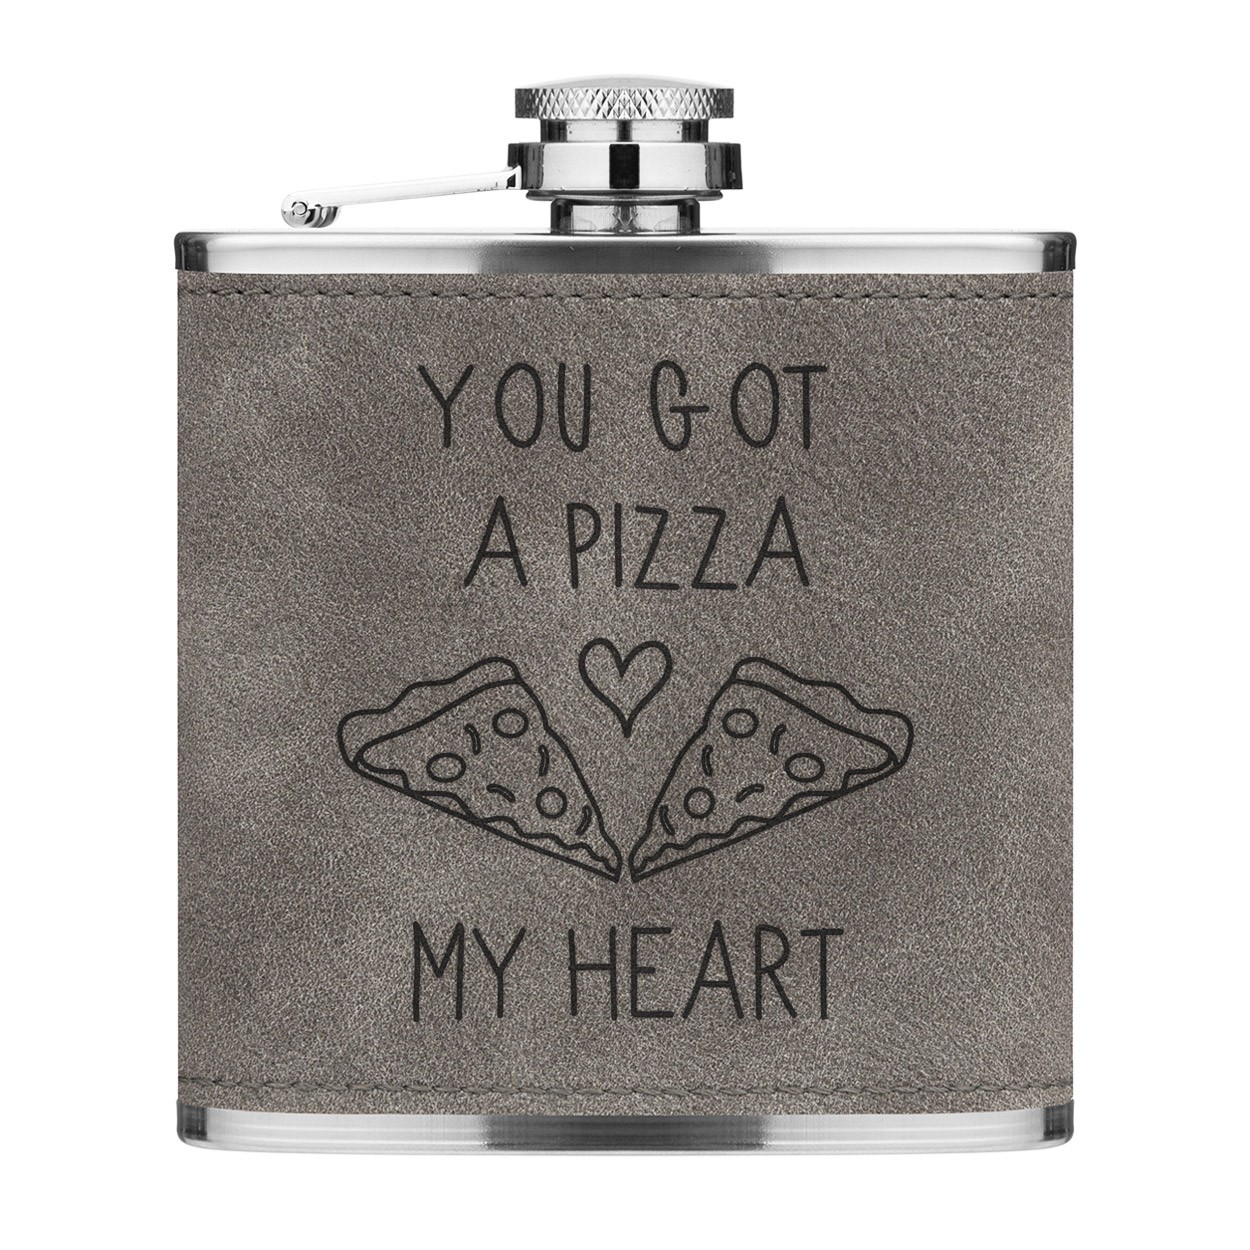 You Got A Pizza My Heart 6oz PU Leather Hip Flask Grey Luxe